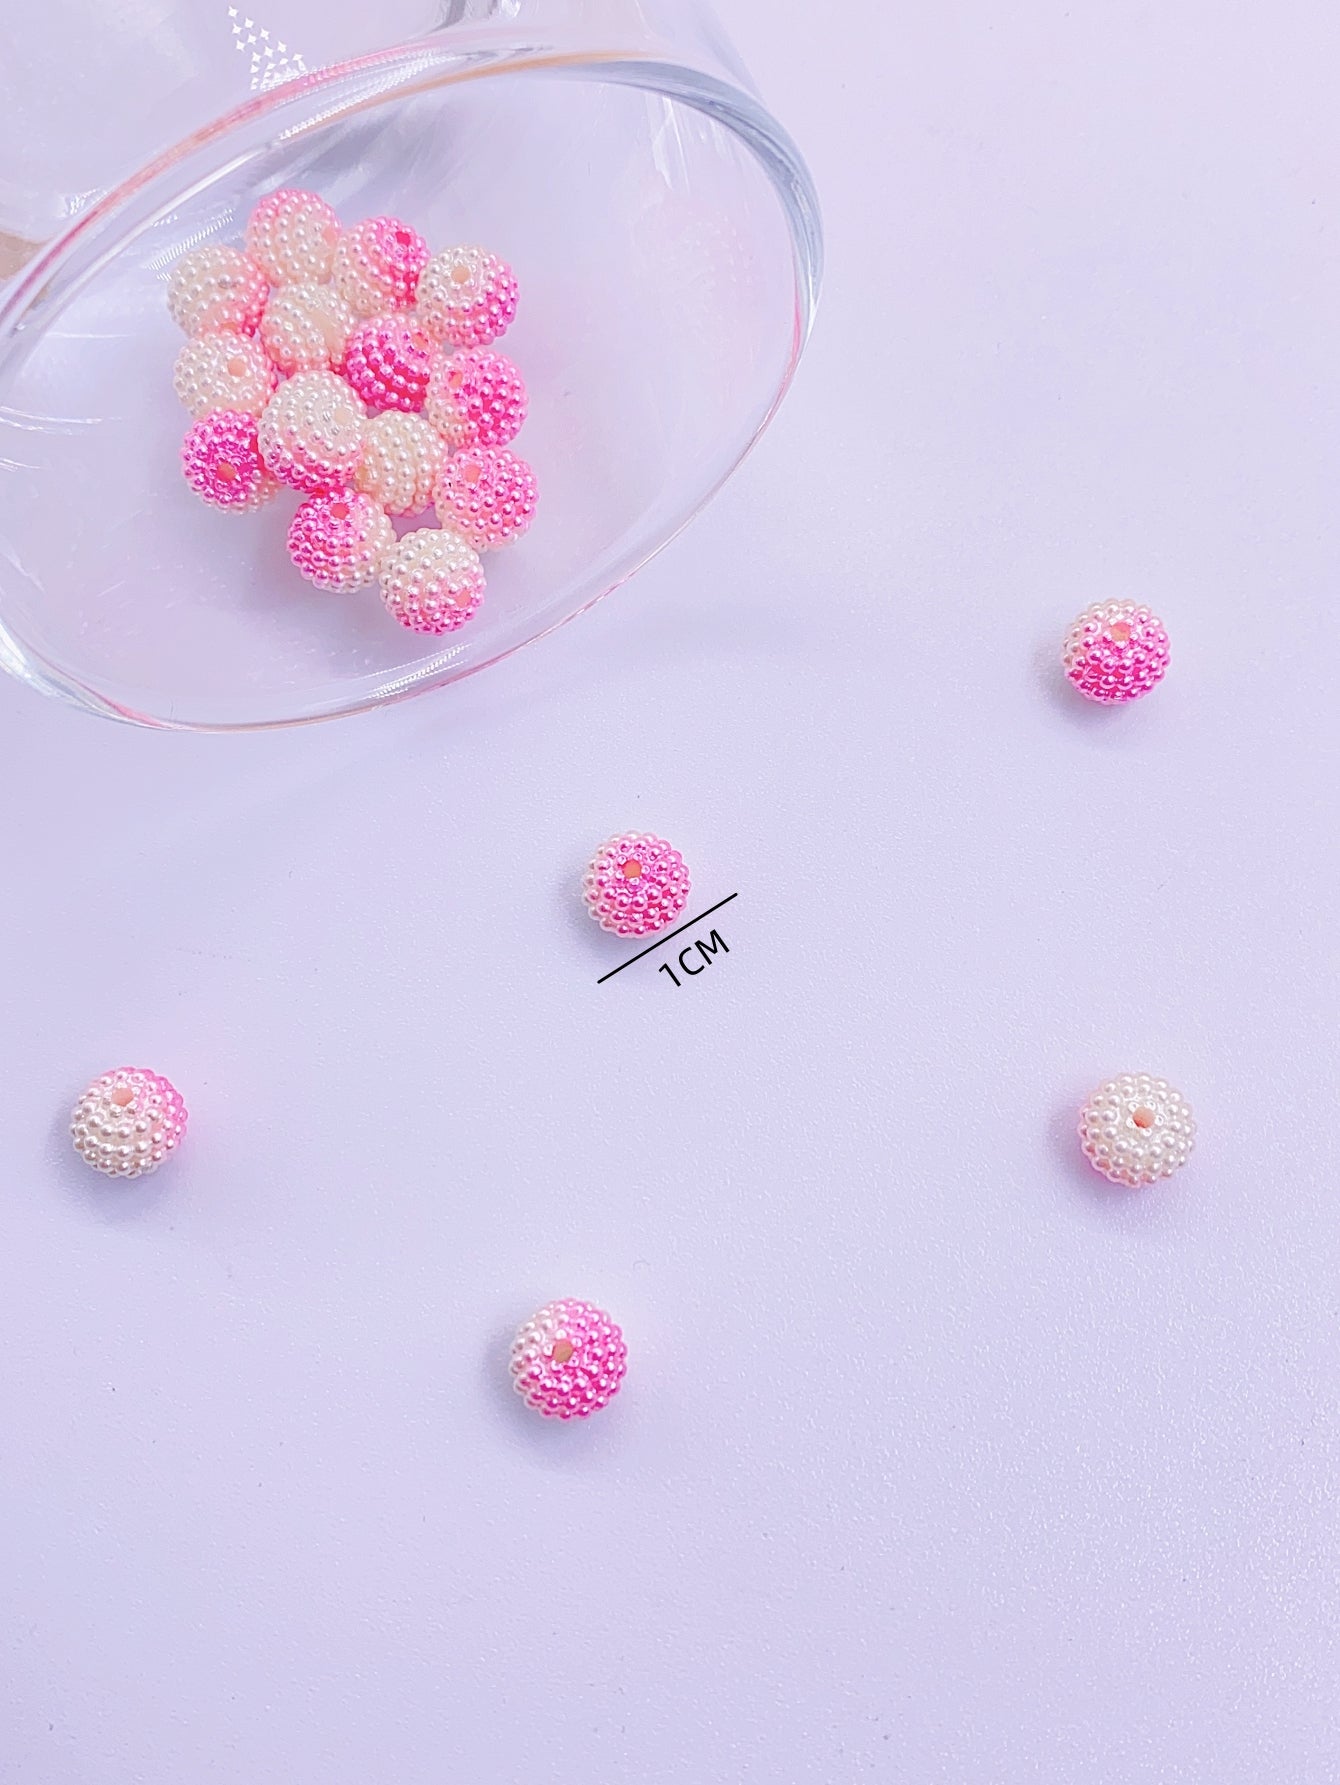 Imitation pearl arbutus ball straight hole round loose bead new colorful ABS pearl DIY jewelry accessories loose bead material